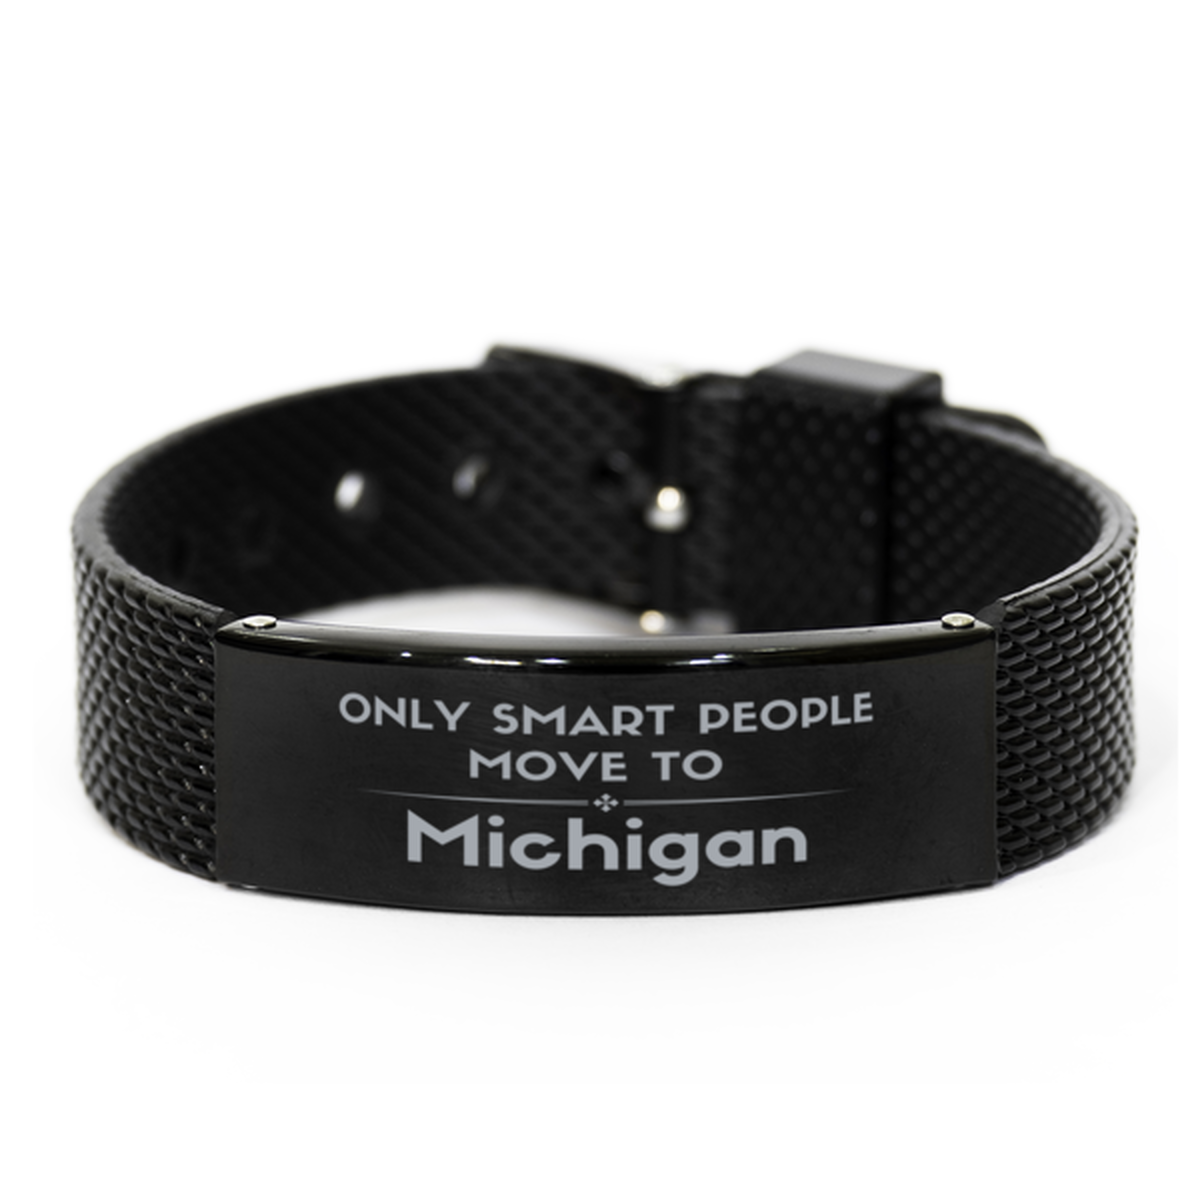 Only smart people move to Michigan Black Shark Mesh Bracelet, Gag Gifts For Michigan, Move to Michigan Gifts for Friends Coworker Funny Saying Quote